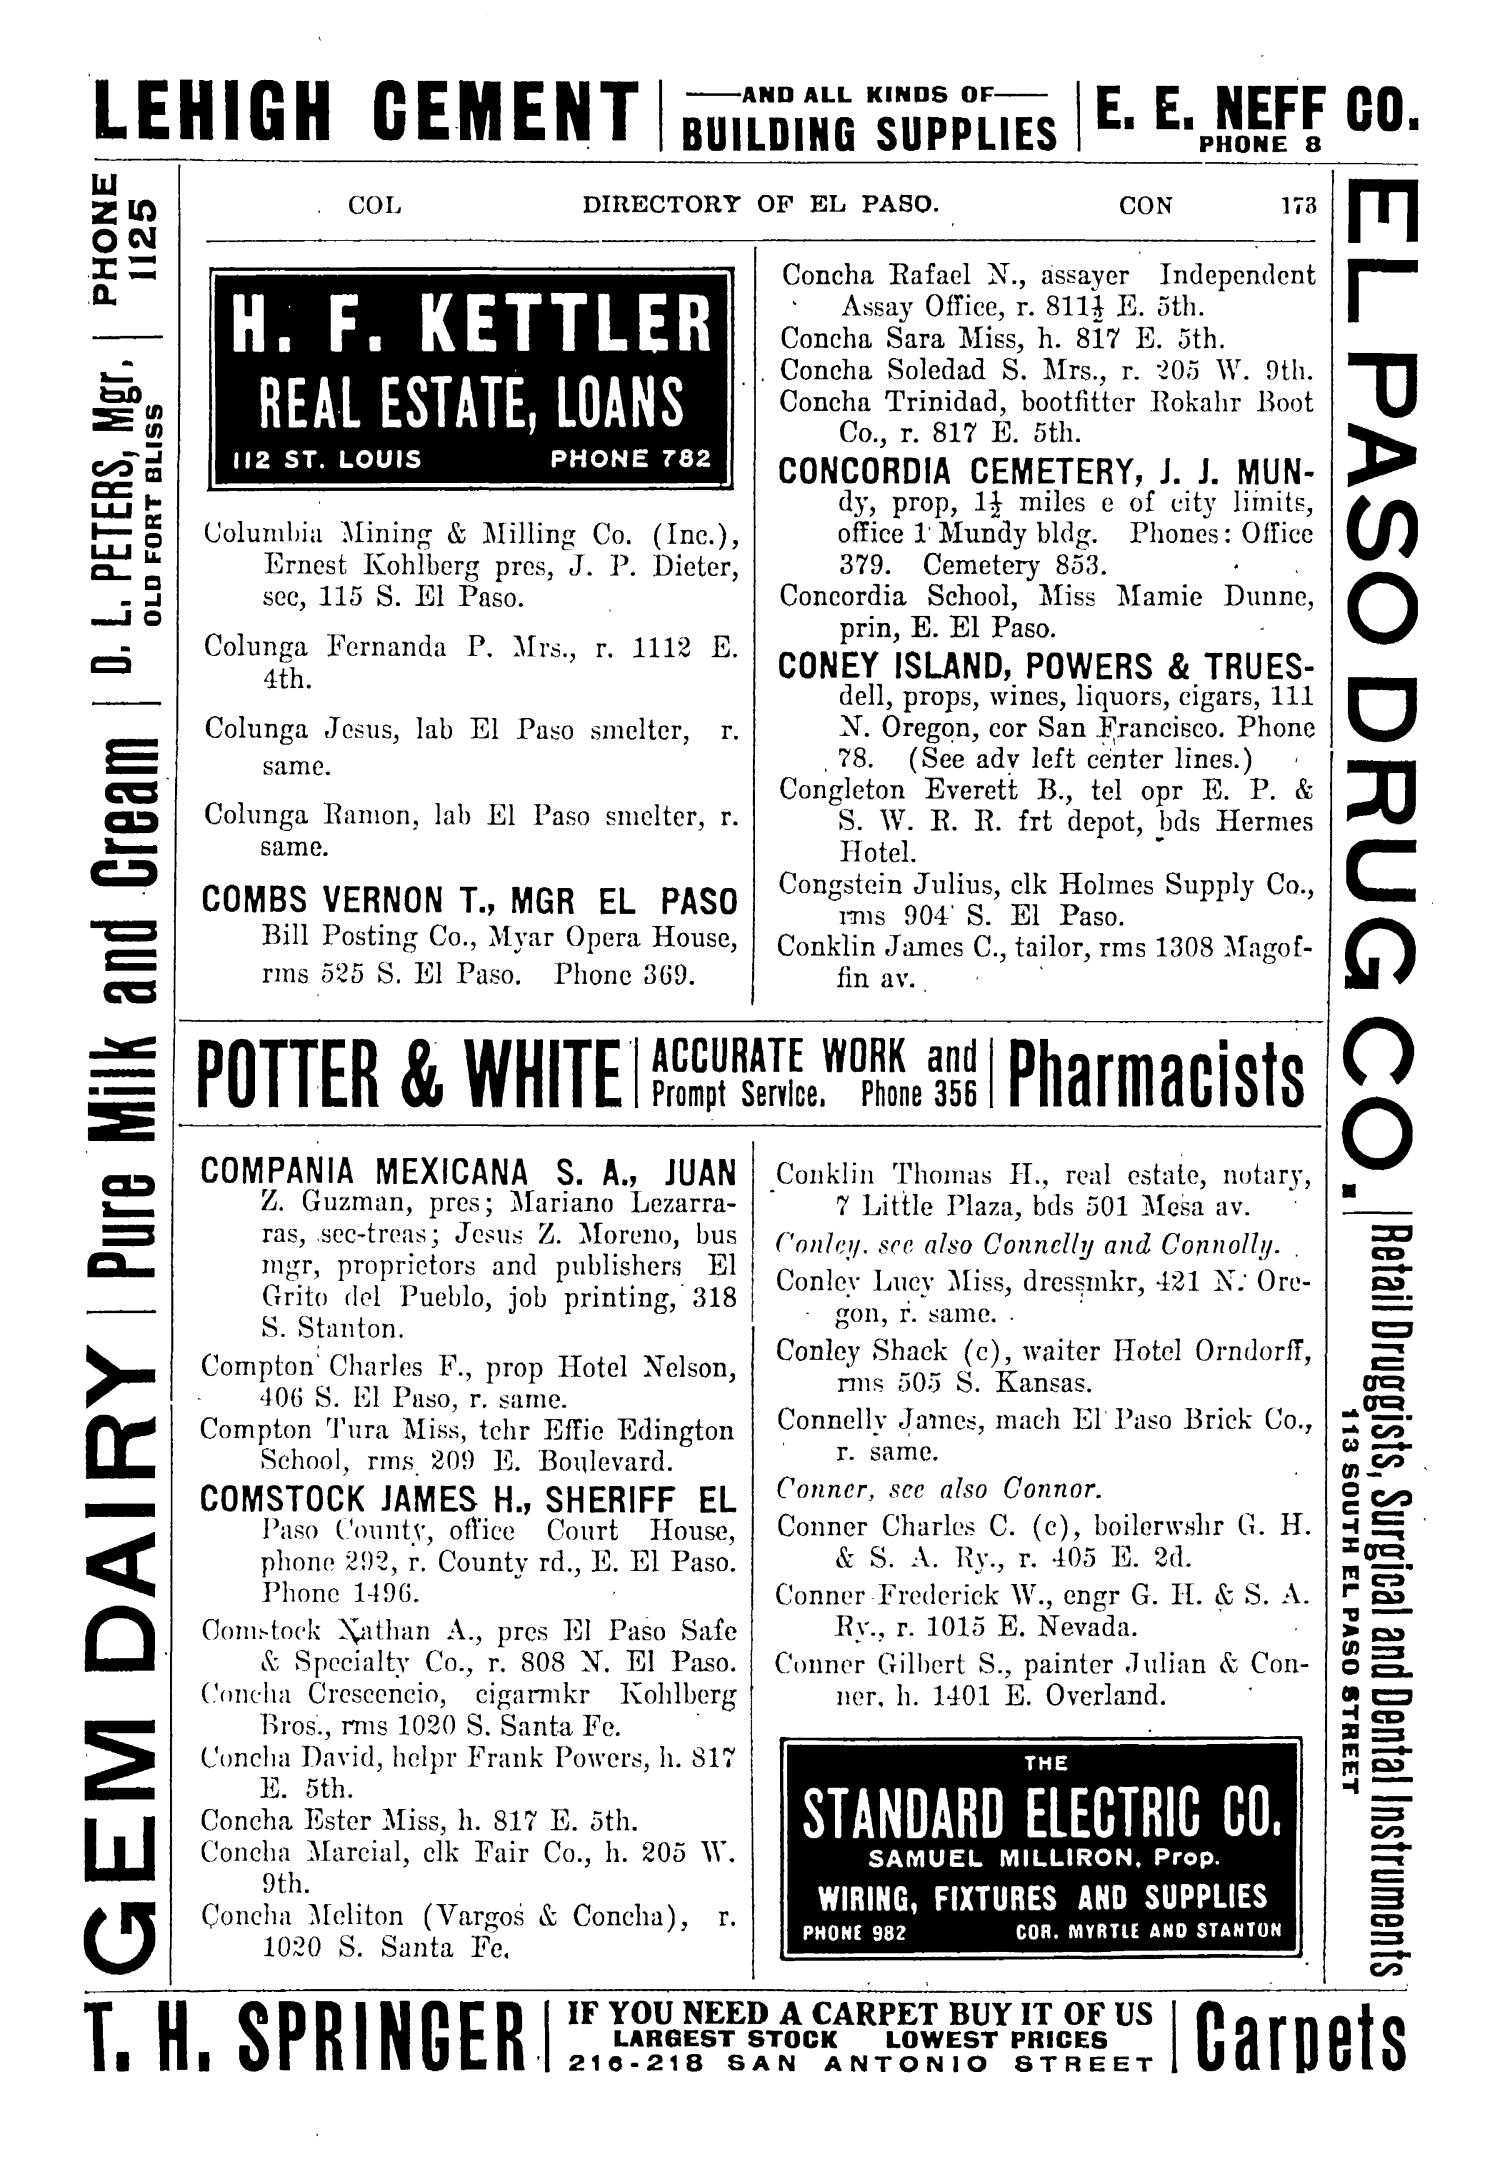 John F. Worley & Co.'s El Paso Directory for 1906
                                                
                                                    173
                                                